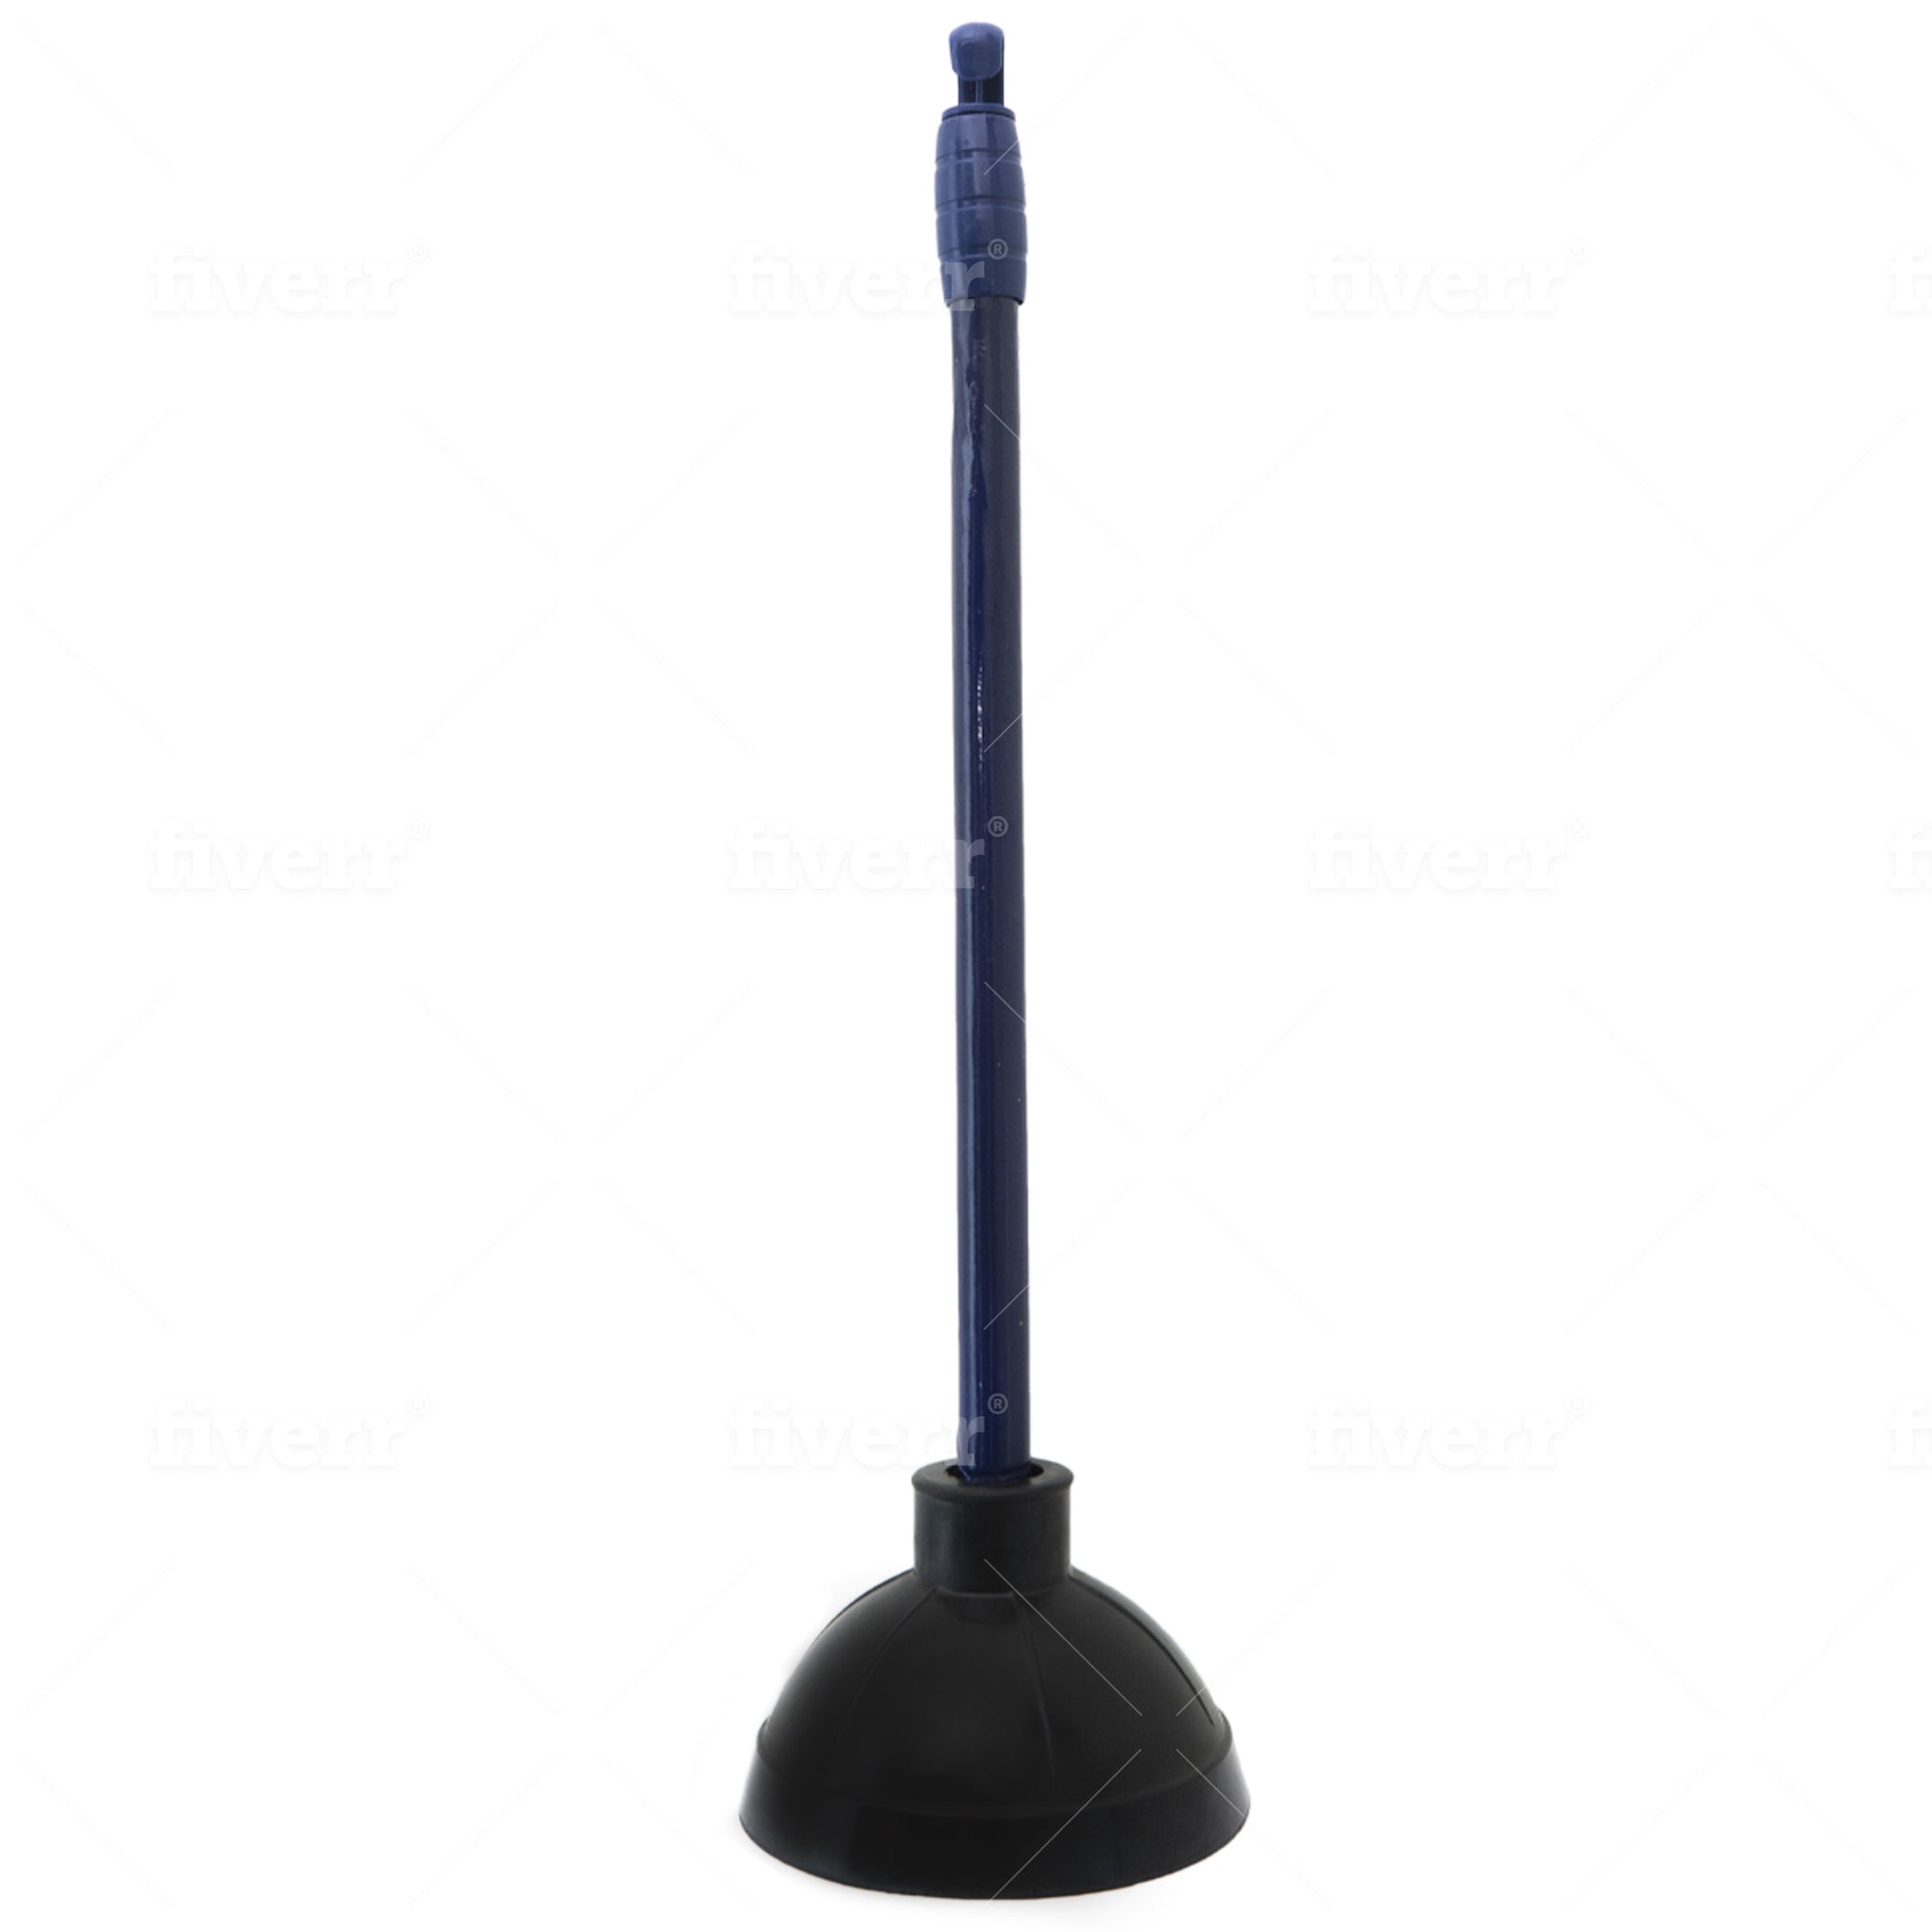 Sink Plunger vs. Toilet Plunger: What's the Difference?